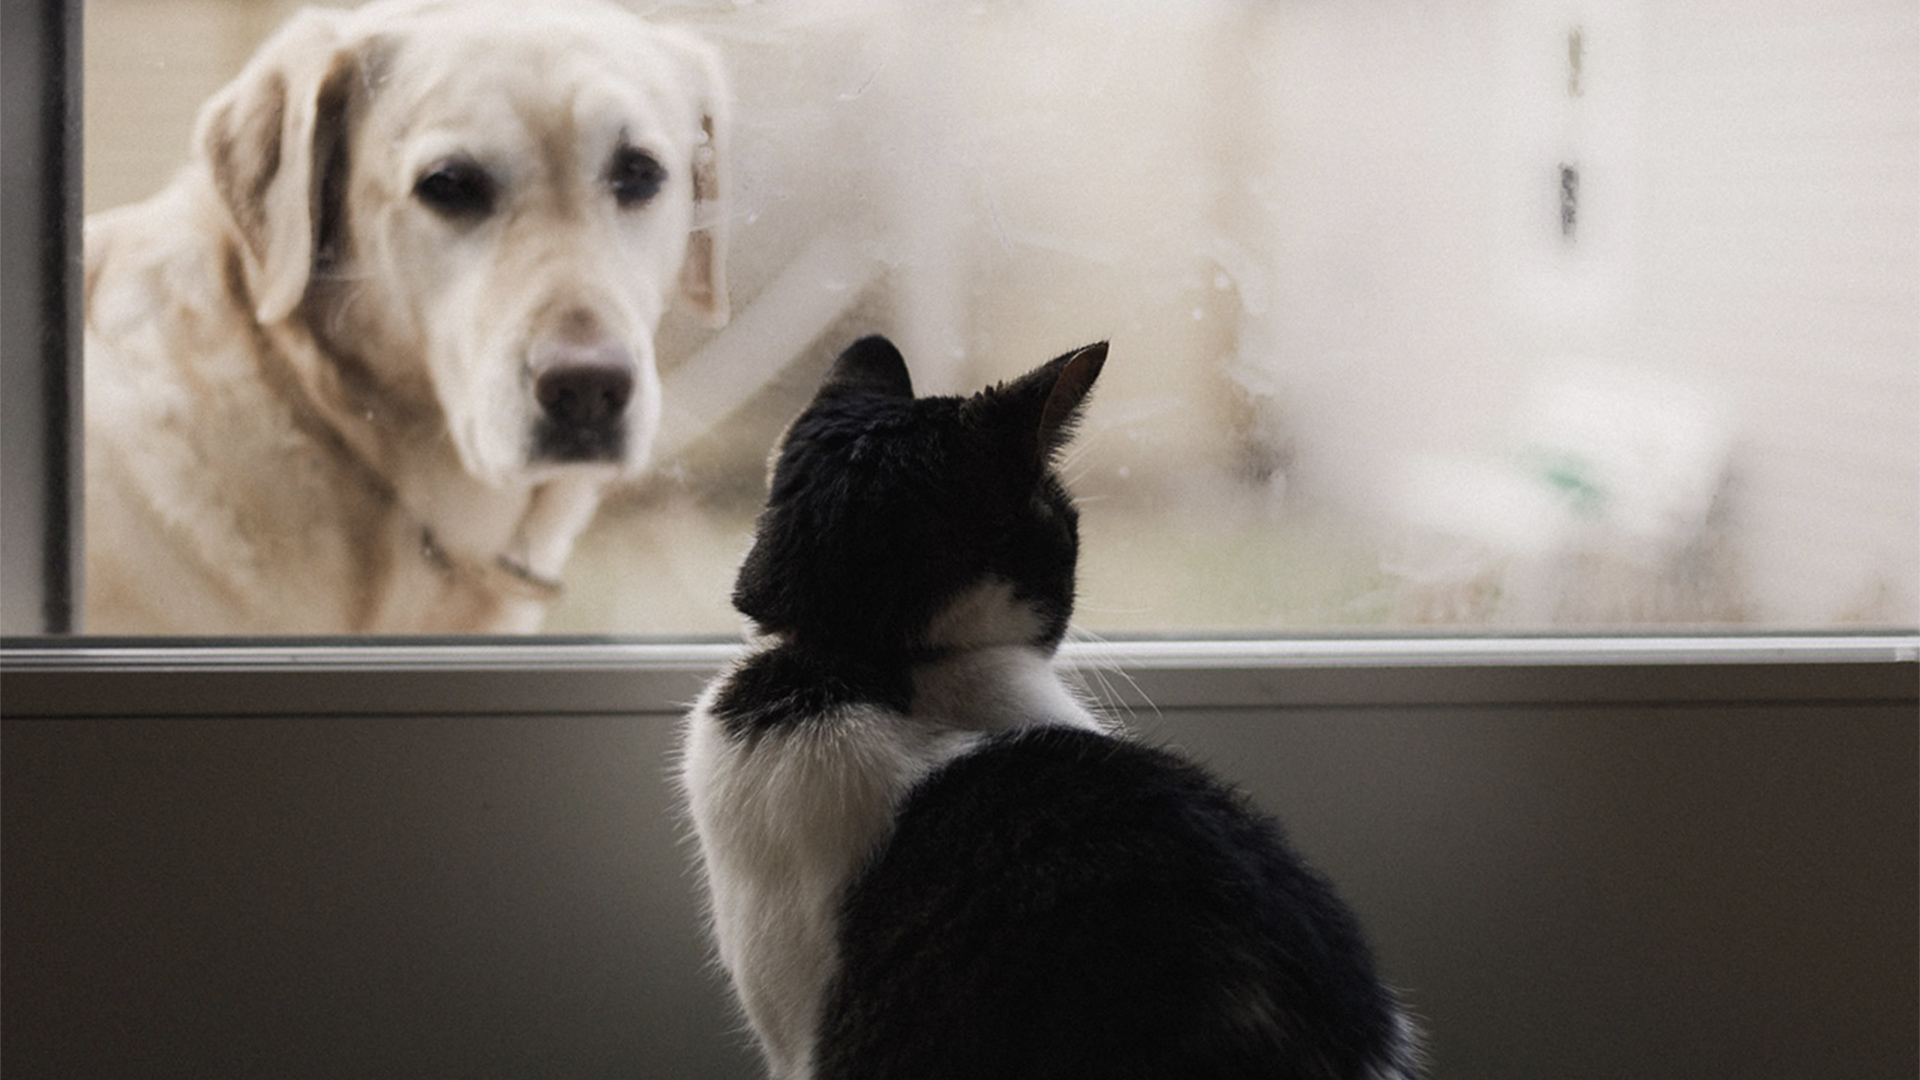 Black and white cat watching a Labrador dog through a window